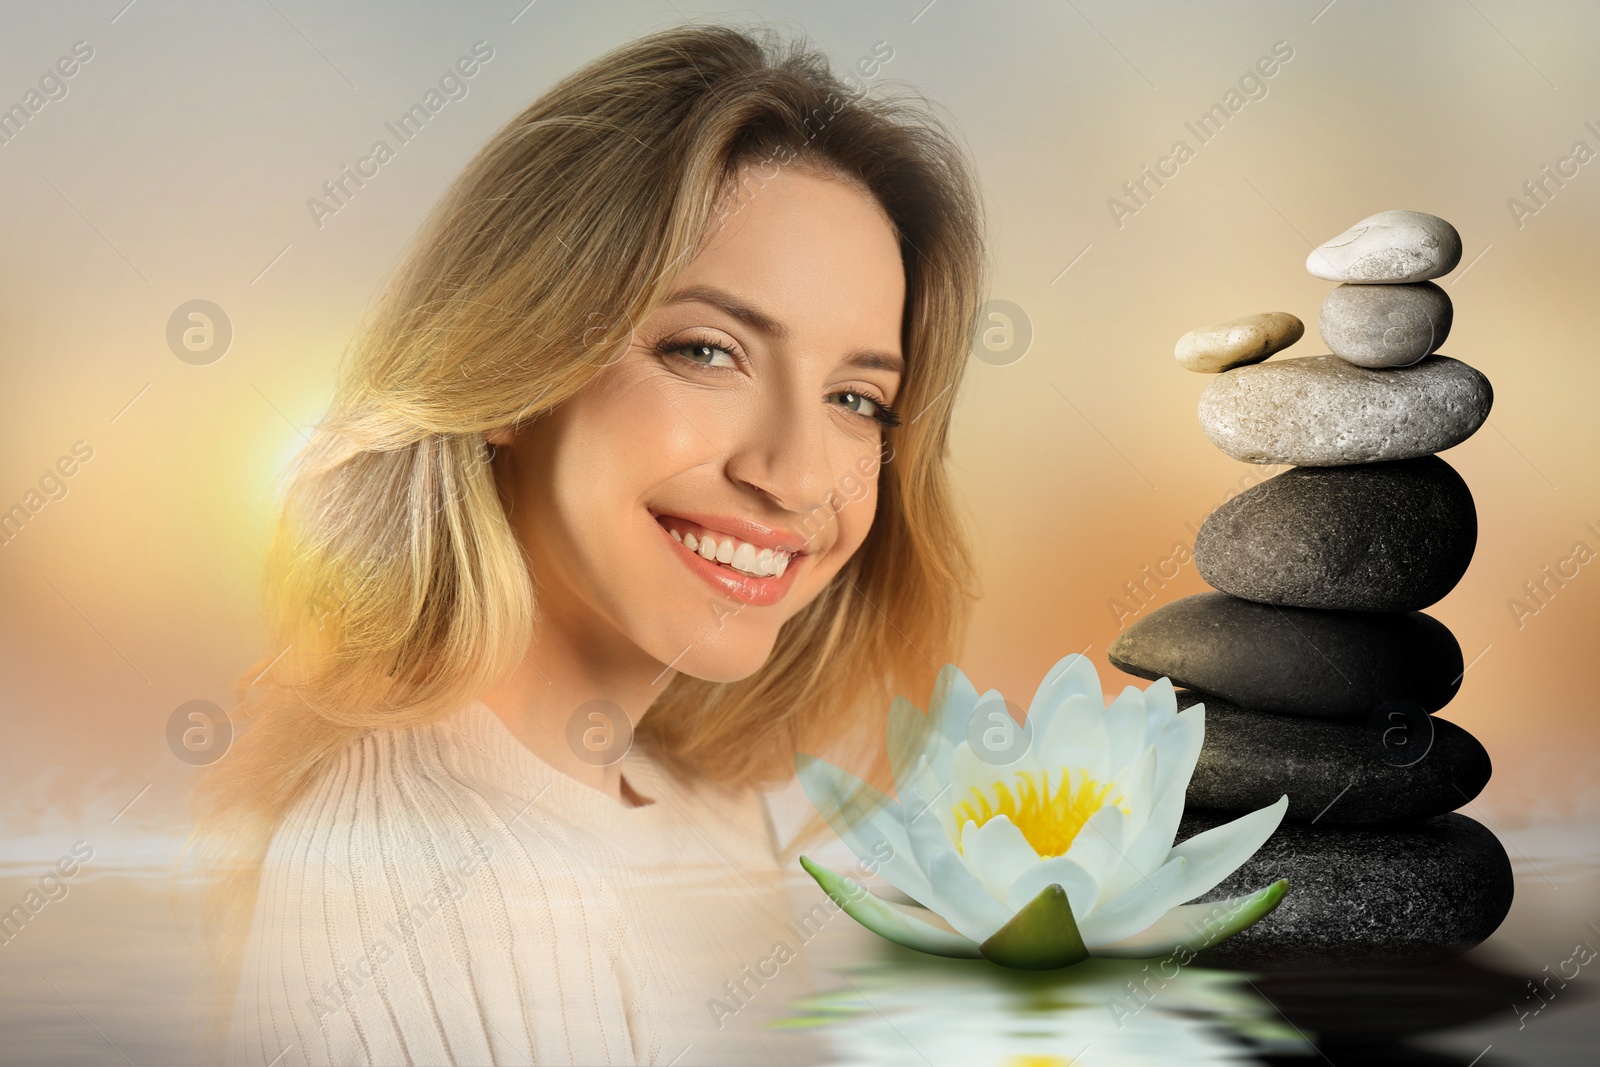 Image of Harmony, balance, mindfulness. Beautiful woman, lotus flower and stack of stones at sunset, double exposure